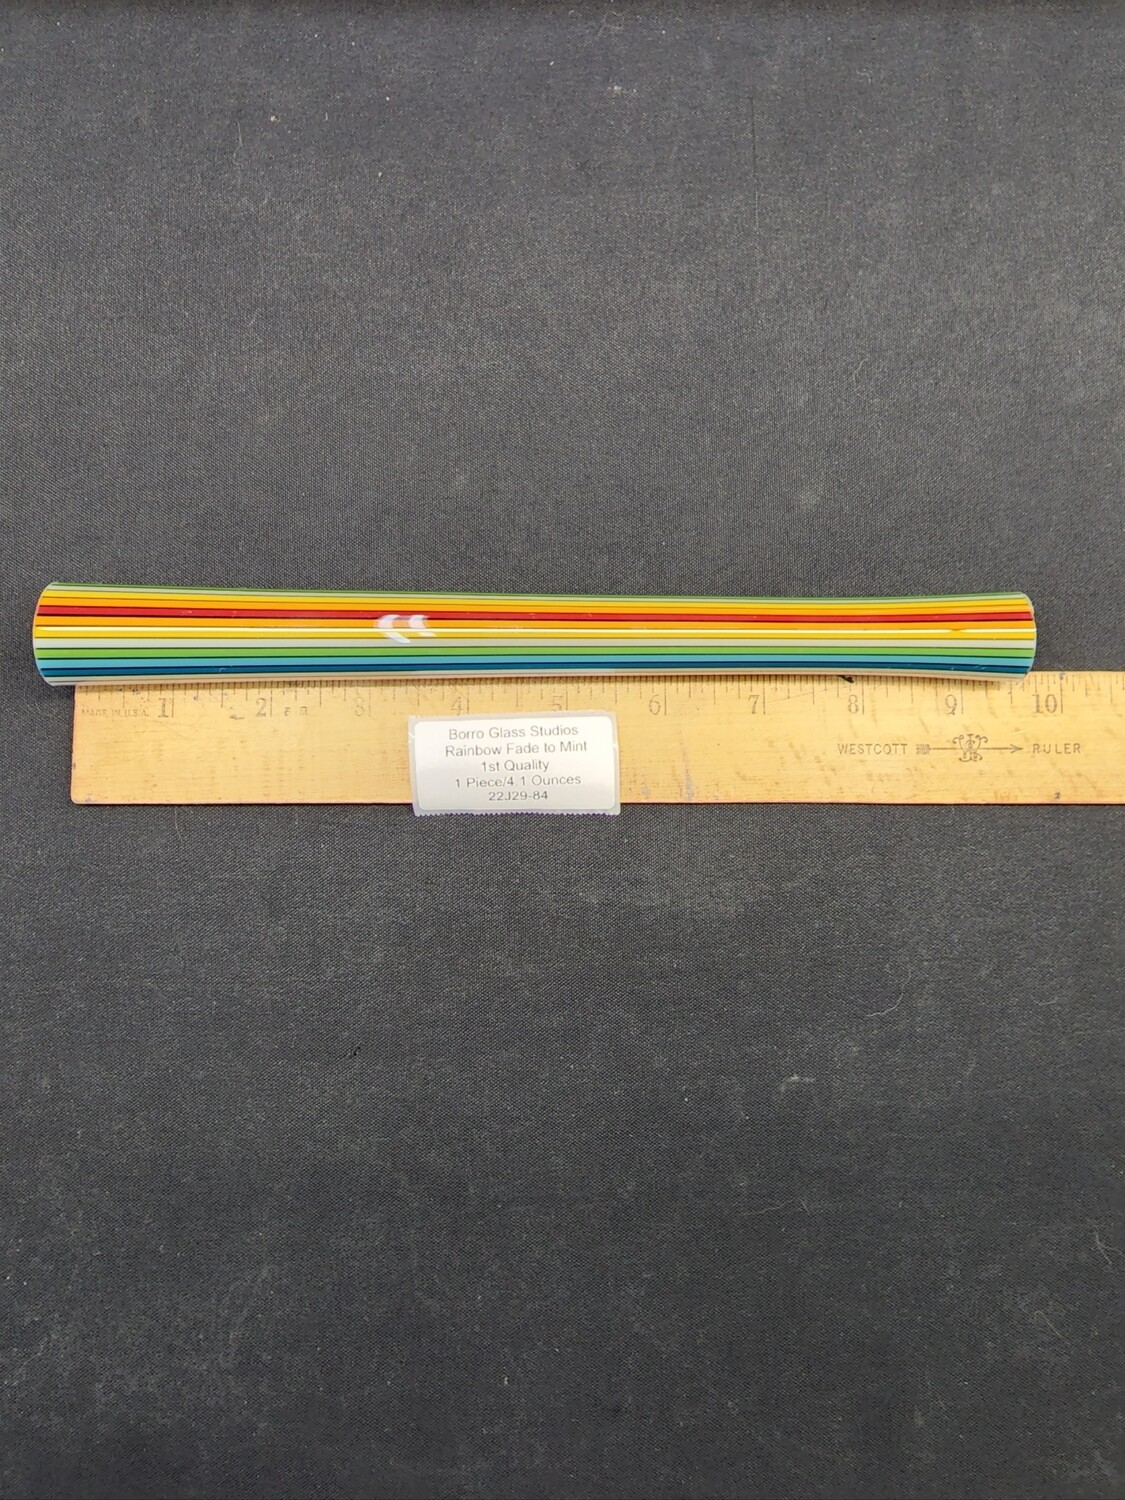 Rainbow Fade to Mint Borro Vac Stacked Line Tubing - 1st Quality - 4.1 Ounces